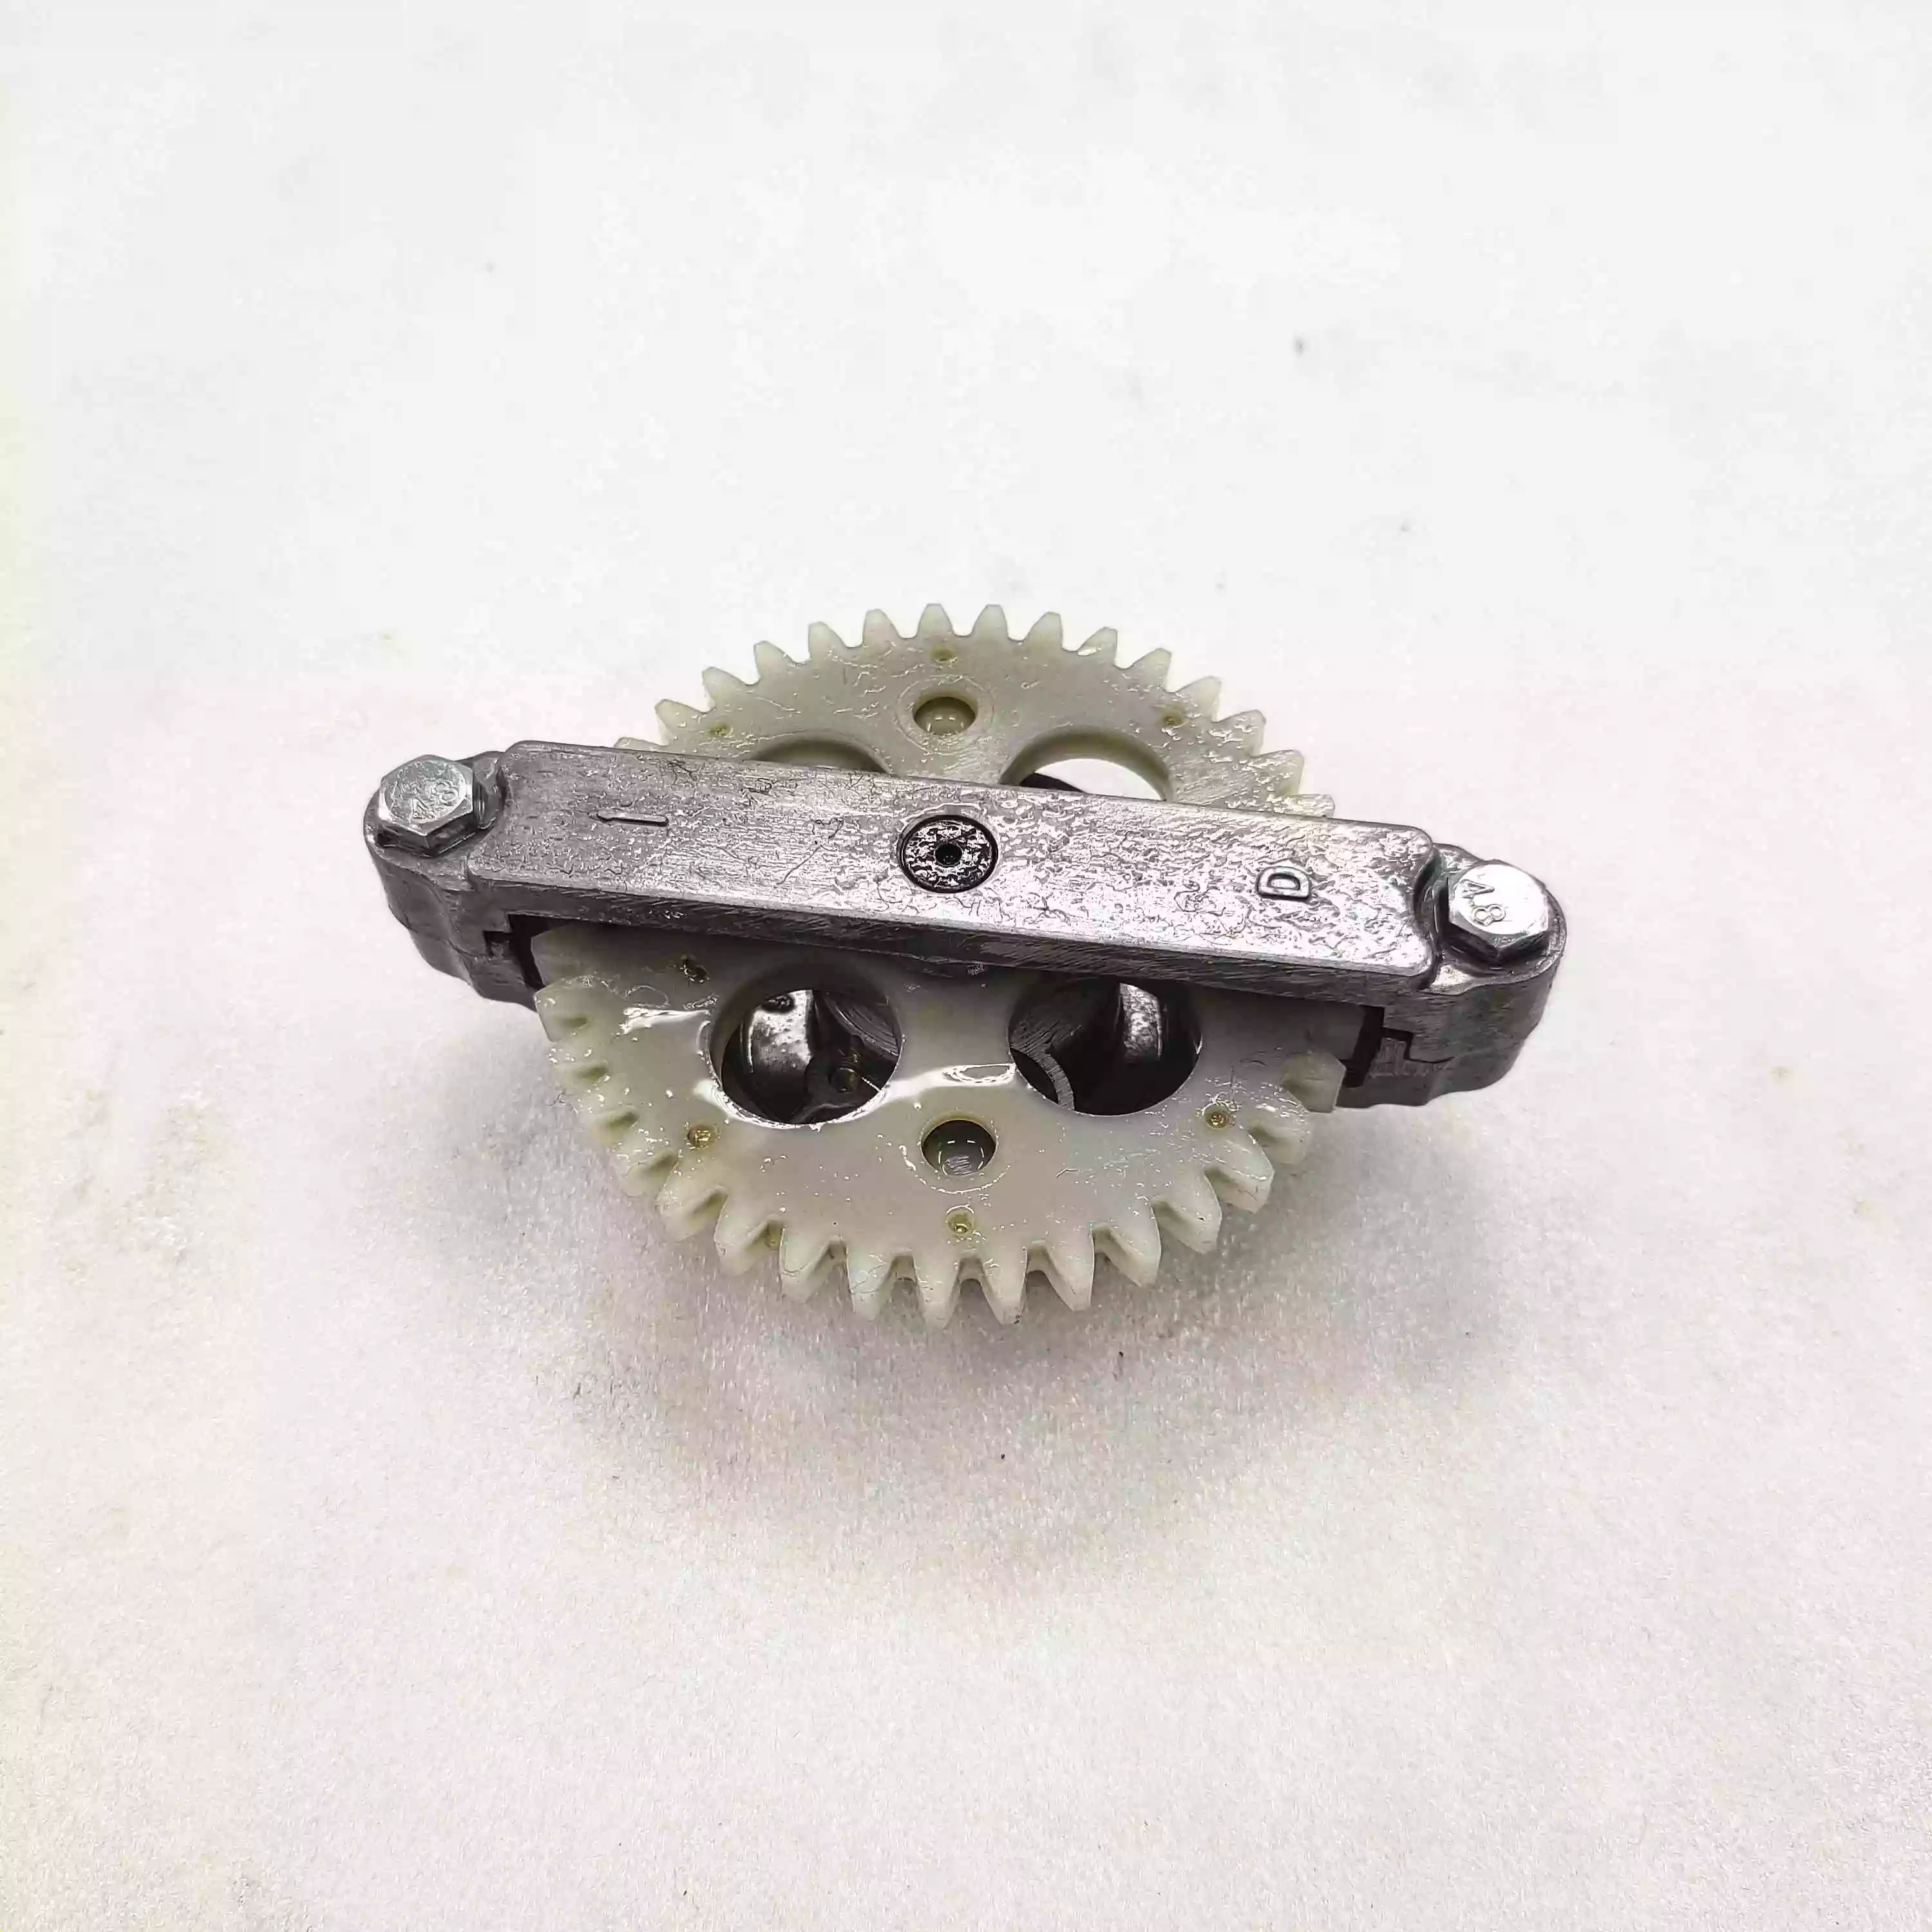 High quality Engine NEW Oil Pump Assembly Diesel Engine Replace Parts High Pressure suitable for tricycle motorcycle